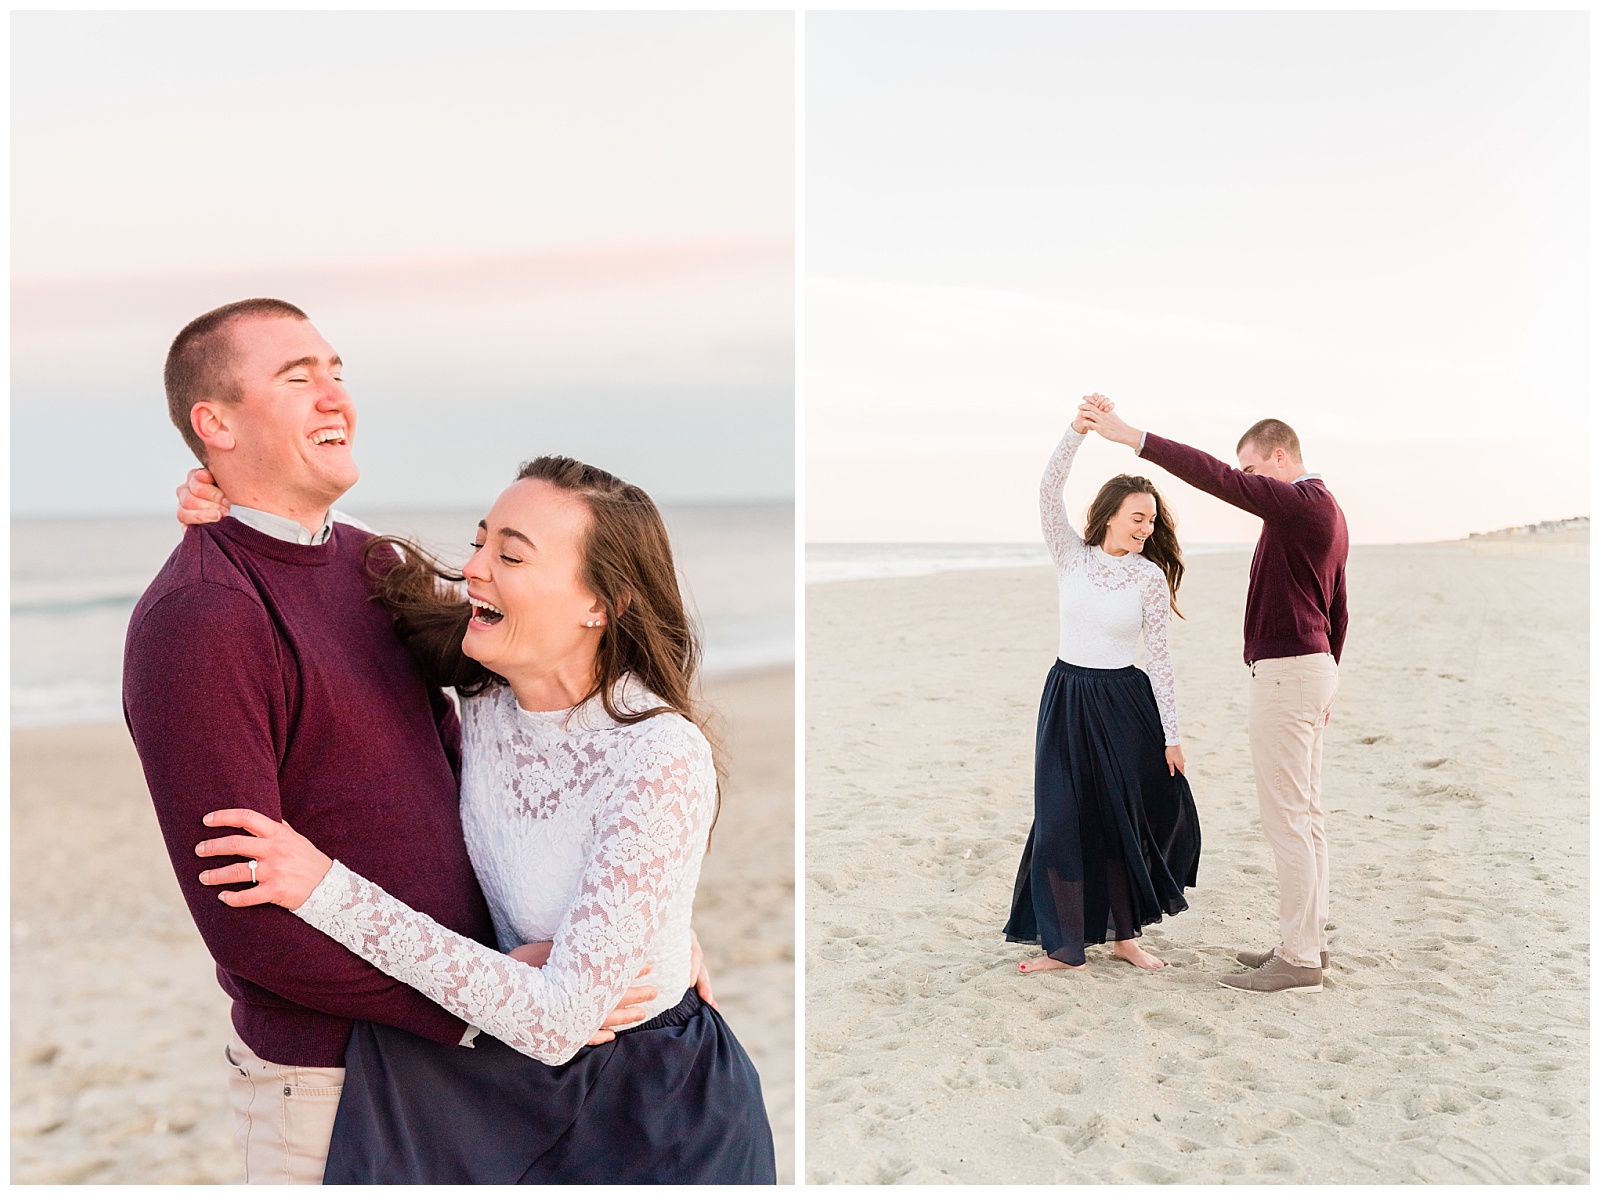 New Jersey, Engagement Session, Wedding Photographer, Beach, Sunset, Shore, Dancing, Laughter